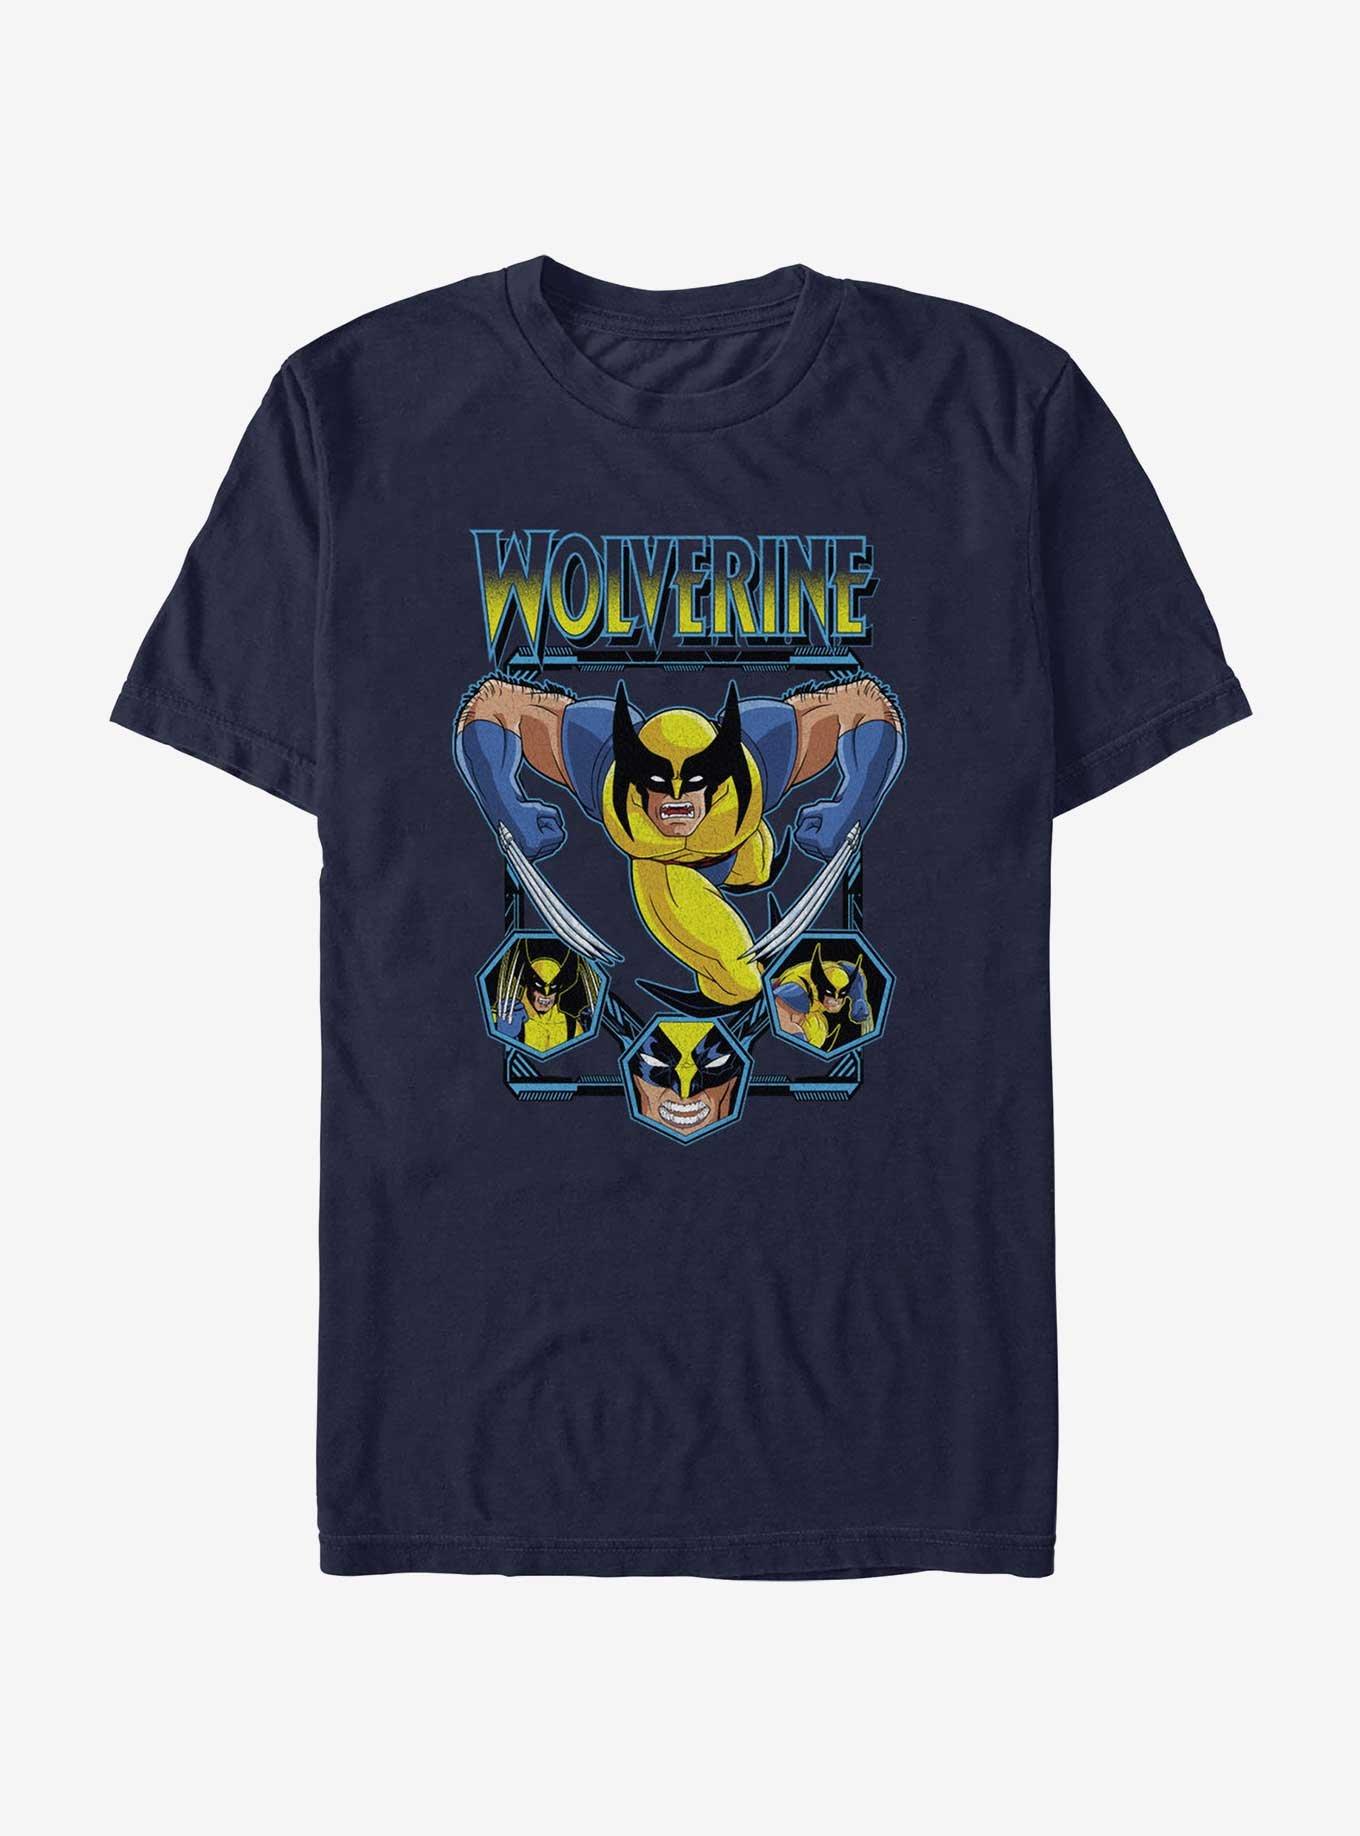 Wolverine Animated Attack T-Shirt, NAVY, hi-res